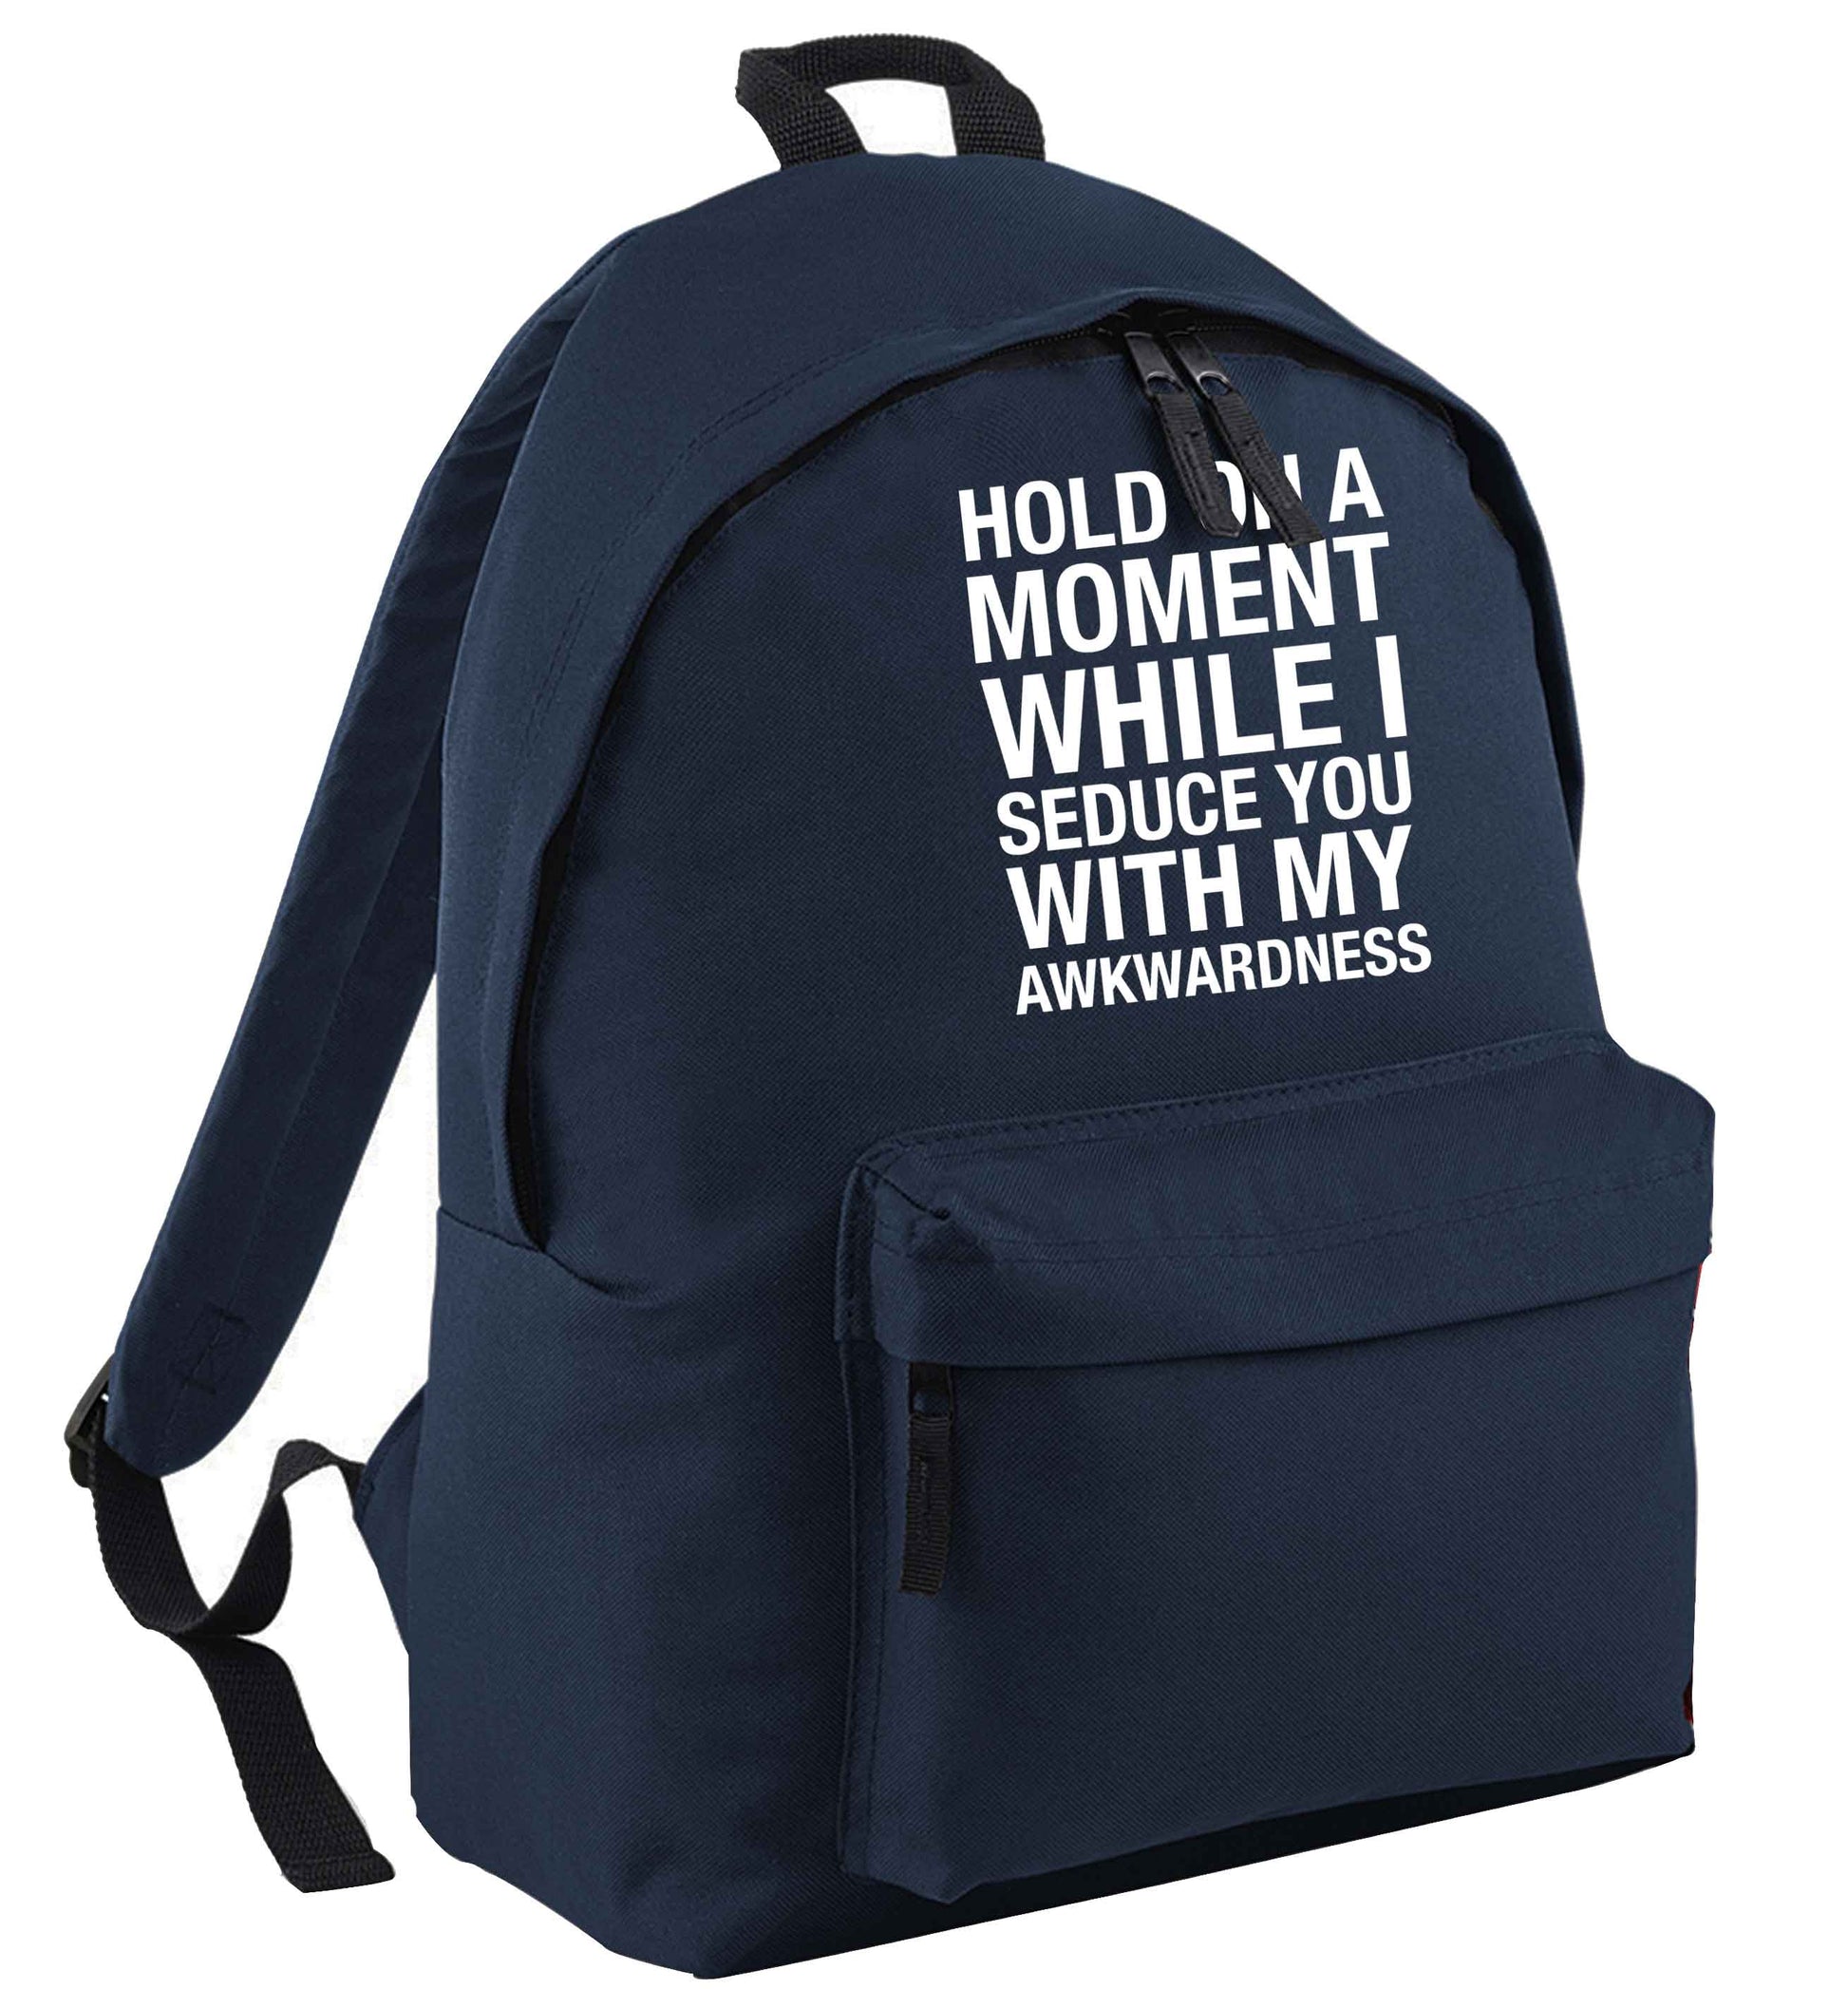 Hold on a moment while I seduce you with my awkwardness navy adults backpack